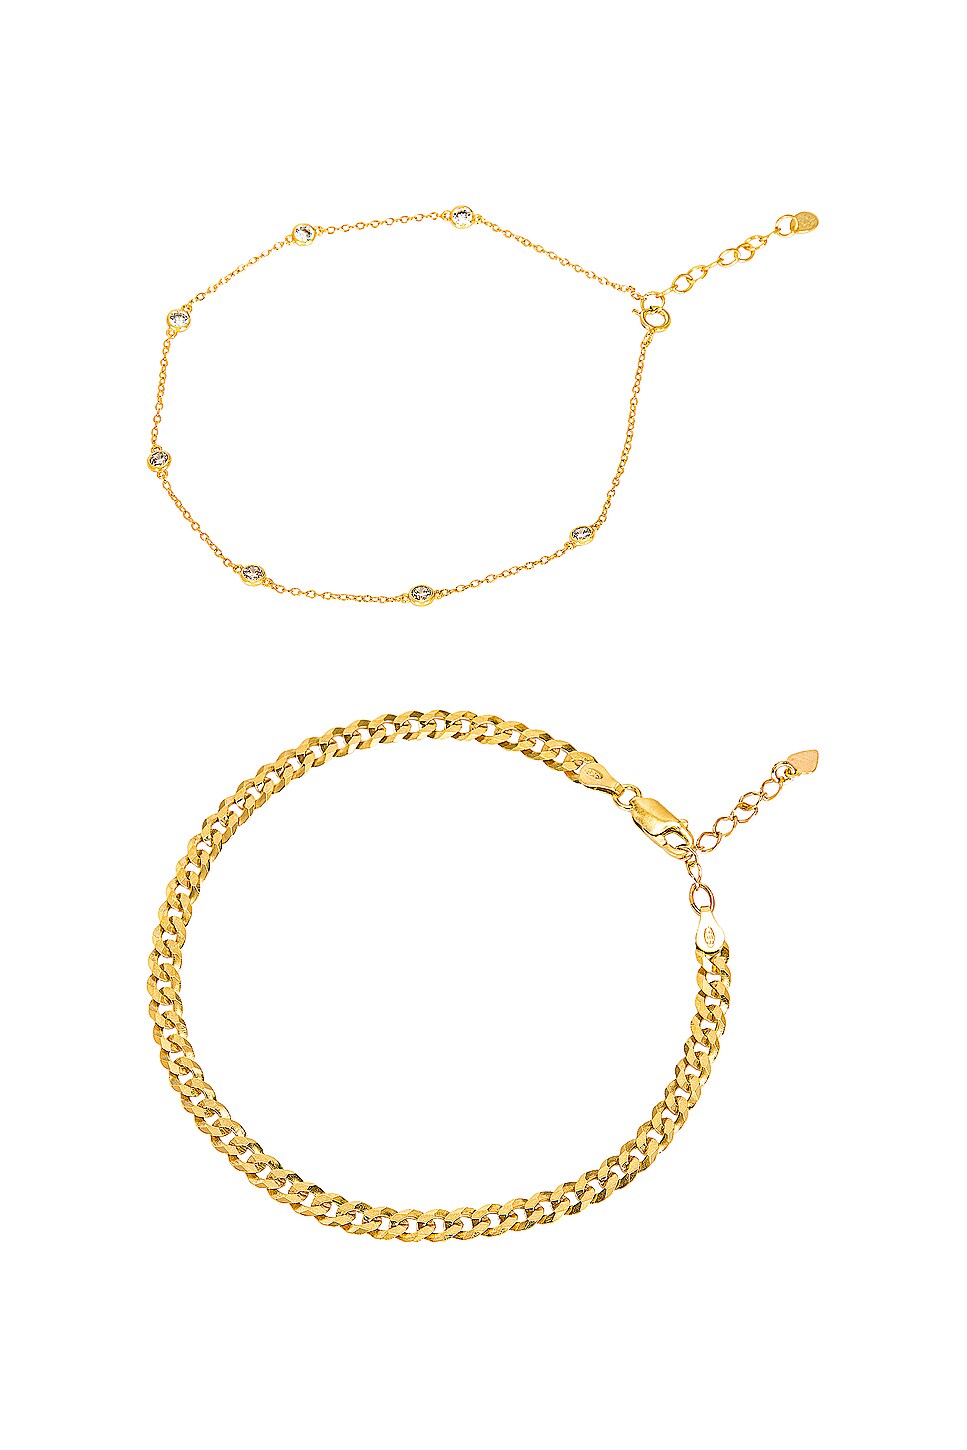 Image 1 of Jordan Road Jewelry for FWRD Endless Summer Anklet Stack in Gold